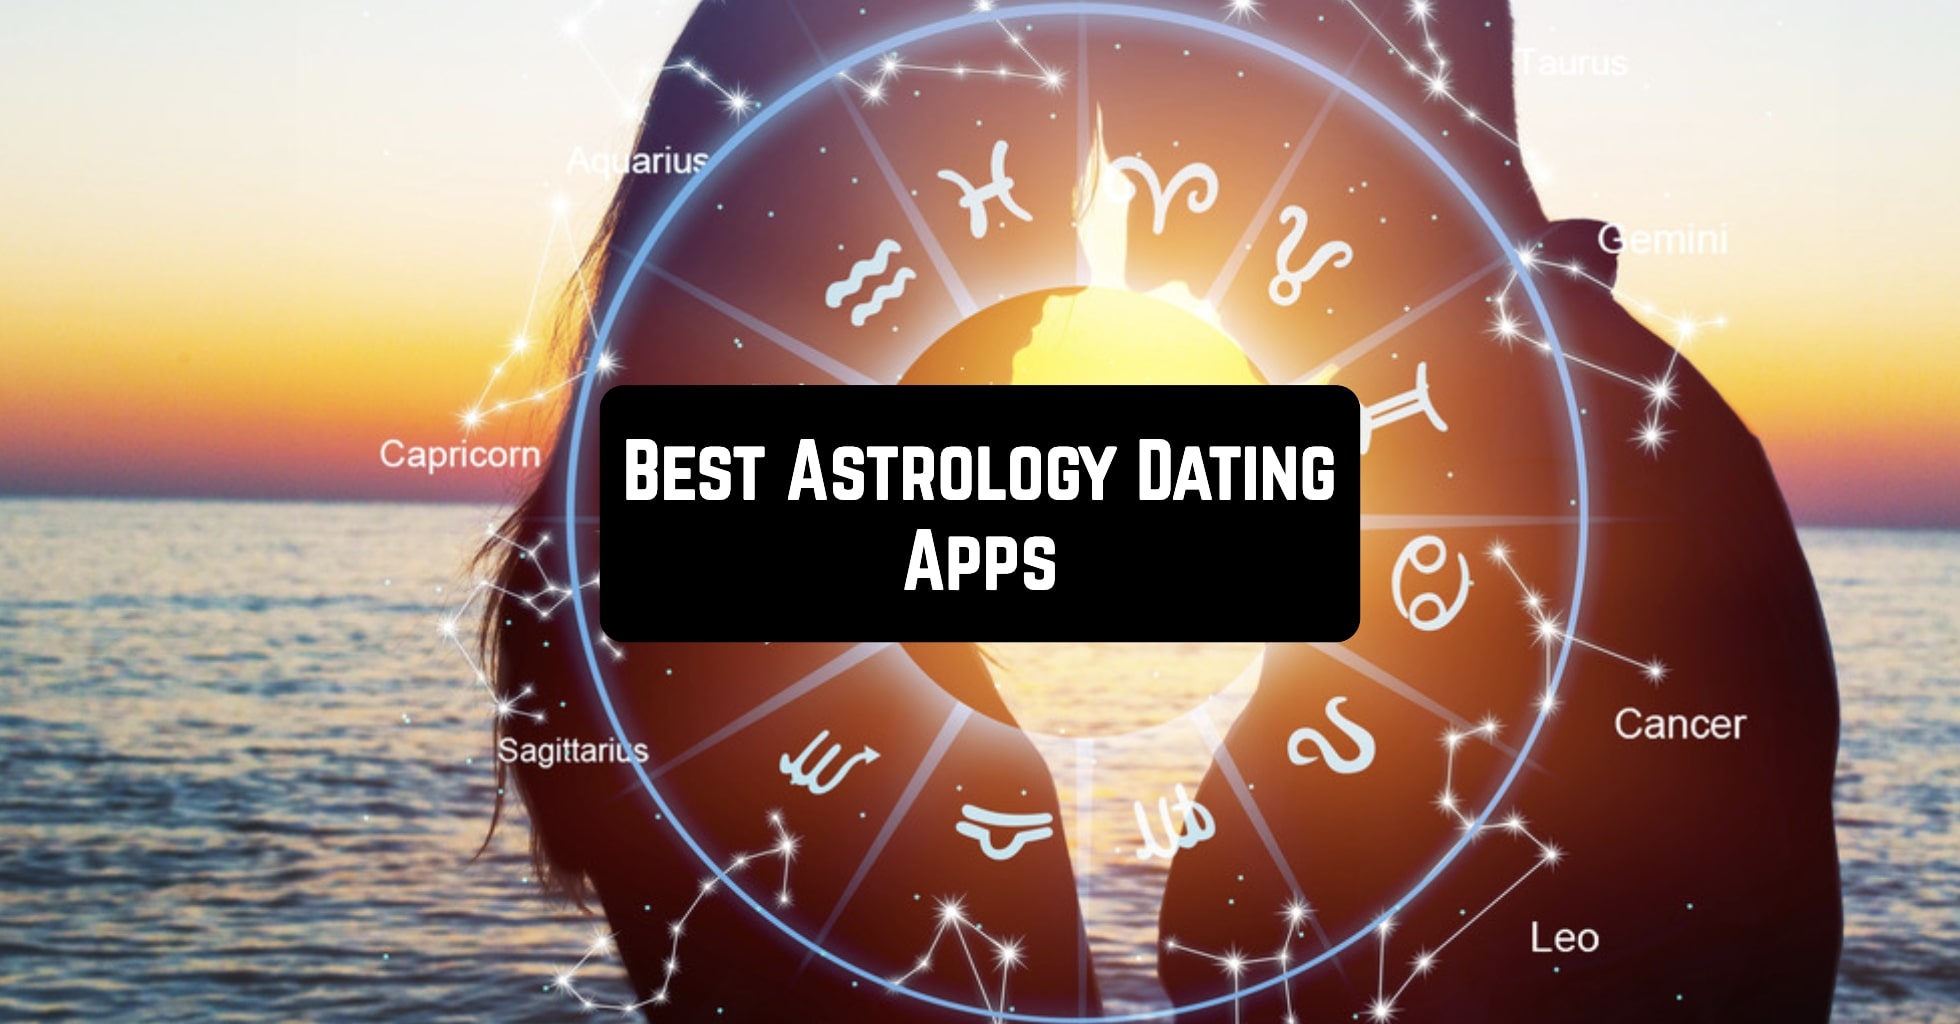 Best Astrology Dating Apps